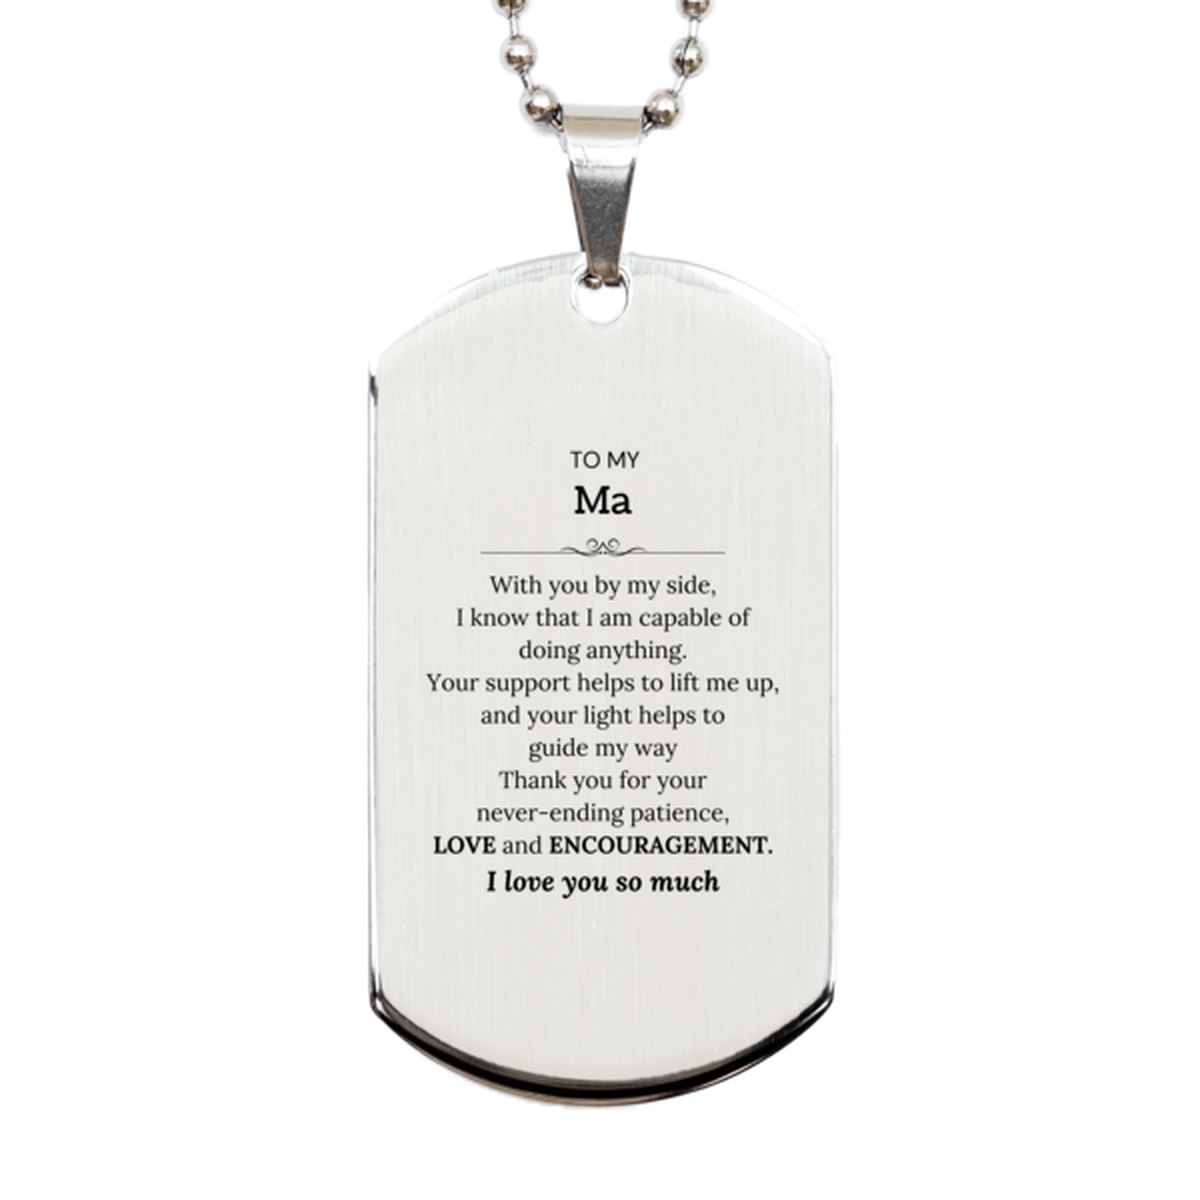 Appreciation Ma Silver Dog Tag Gifts, To My Ma Birthday Christmas Wedding Keepsake Gifts for Ma With you by my side, I know that I am capable of doing anything. I love you so much